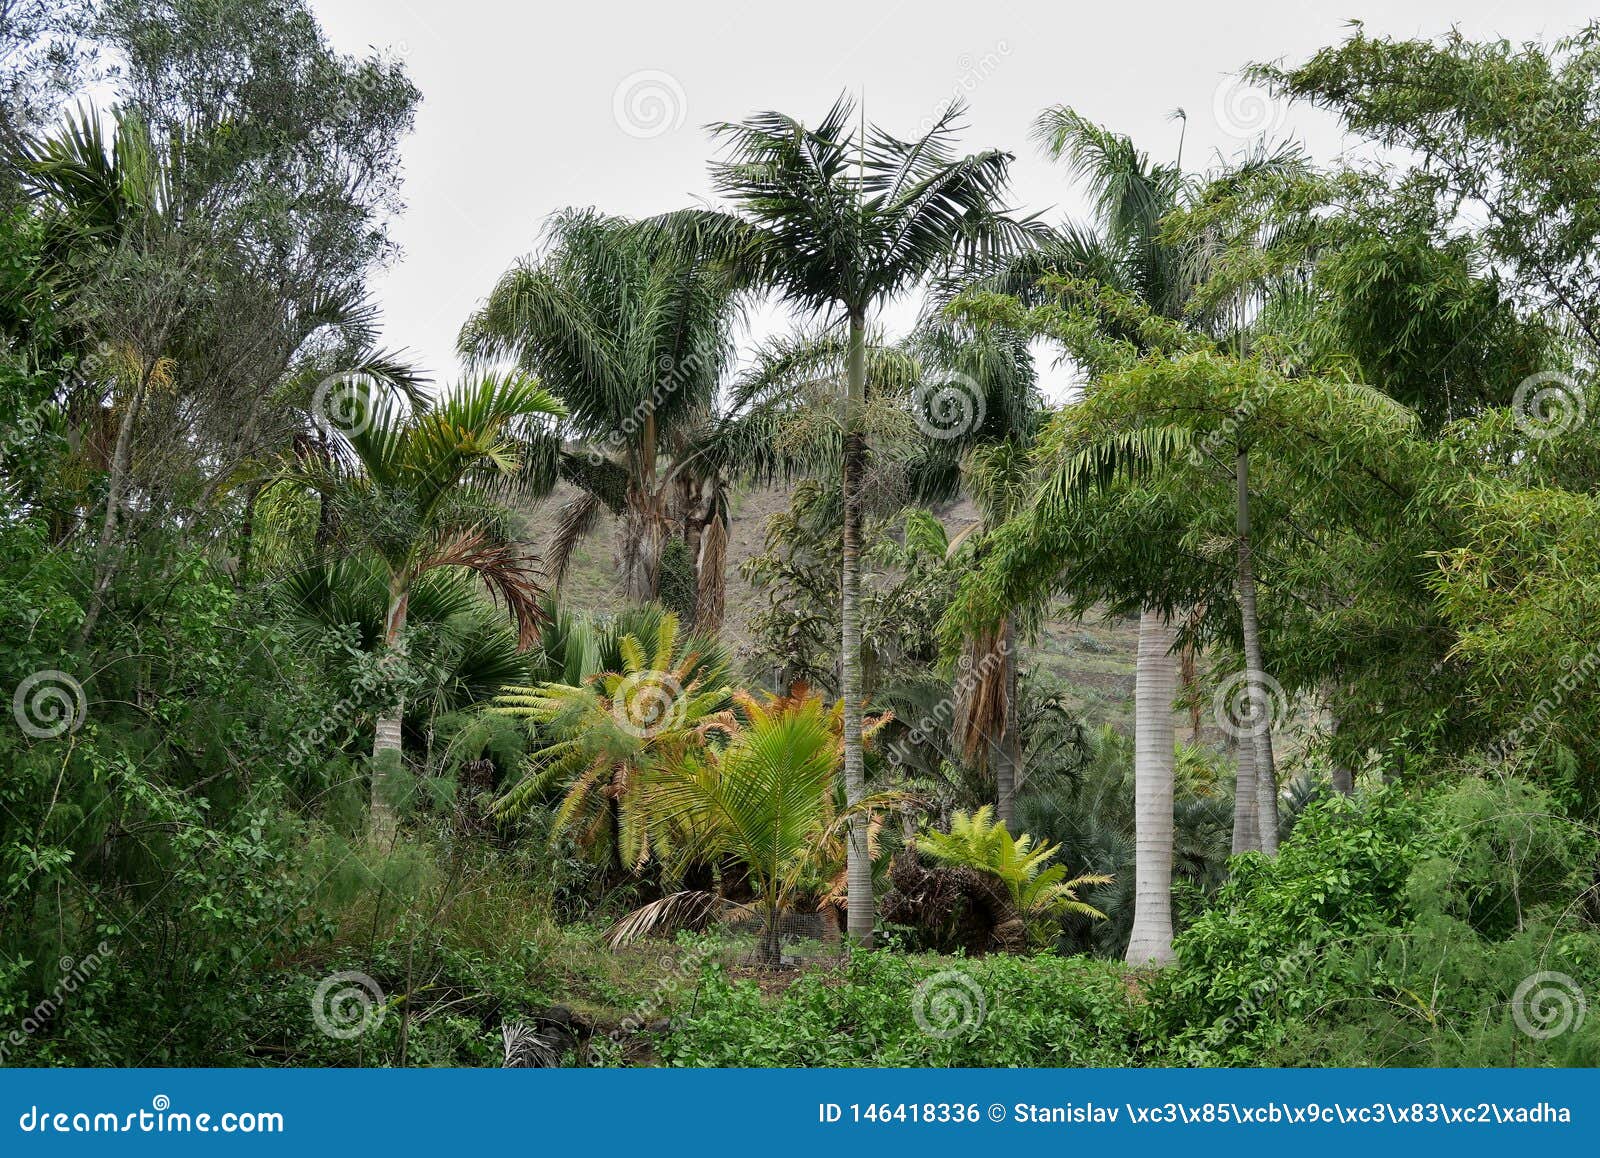 palm trees in the botanical garden of jardÃÂ­n botÃÂ¡nico viera y clavijo in island of gran canaria